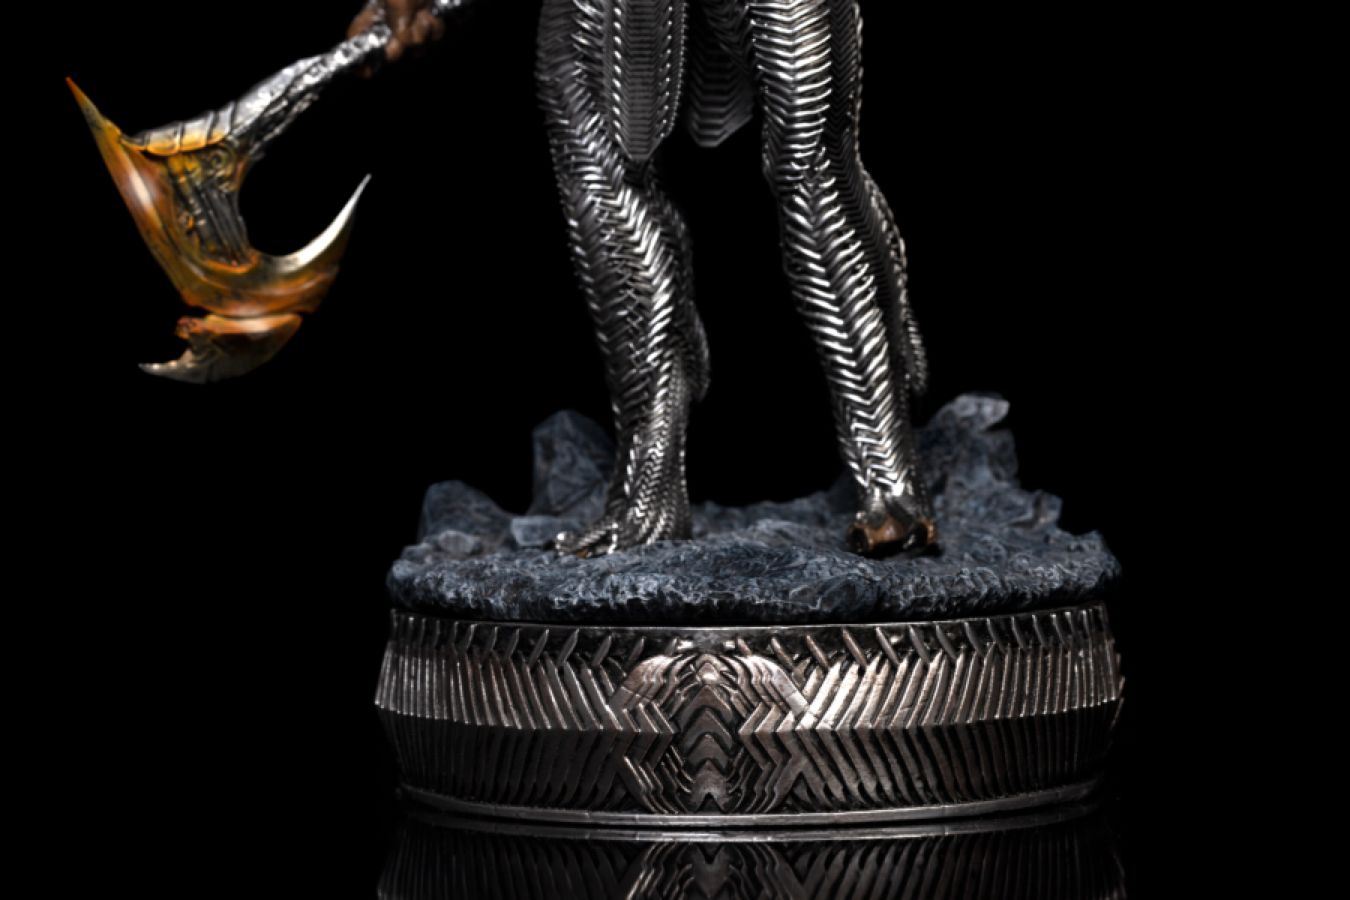 Justice League Movie: Snyder Cut - Steppenwolf 1:10 Scale Statue